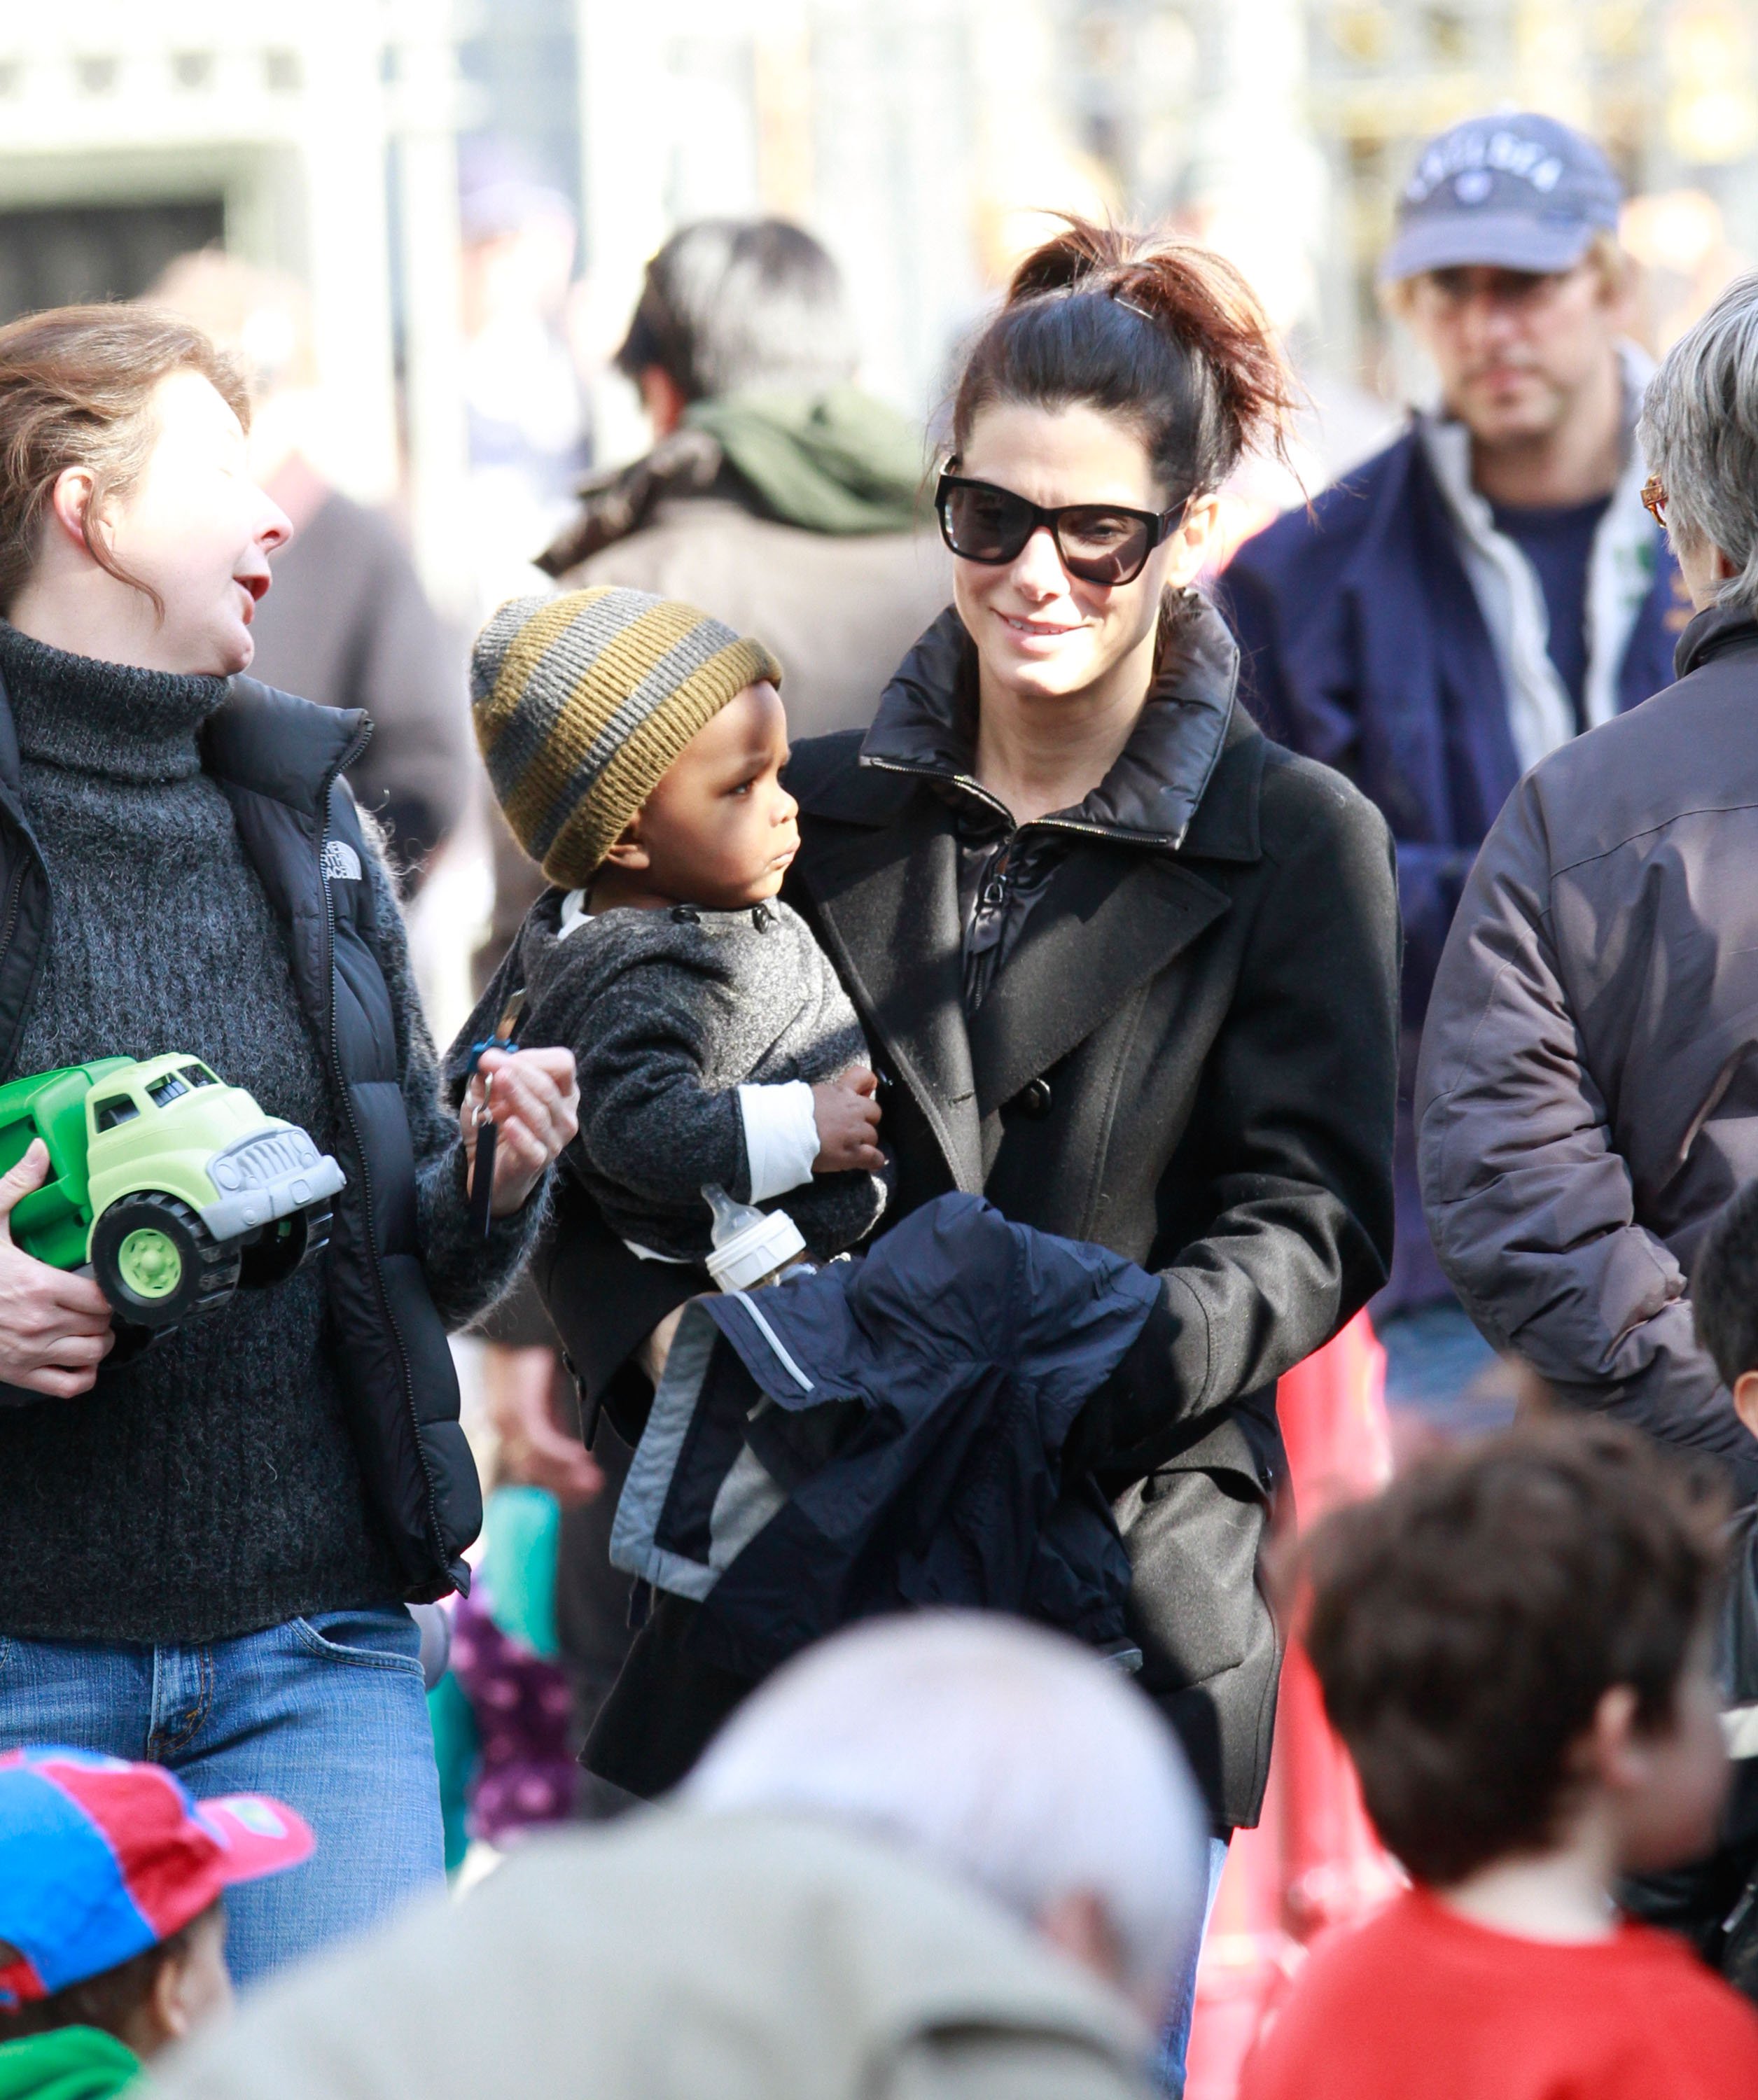 Sandra Bullock and son Louis Bullock pictured in Manhattan on March 20, 2011 in New York City. | Source: Getty Images